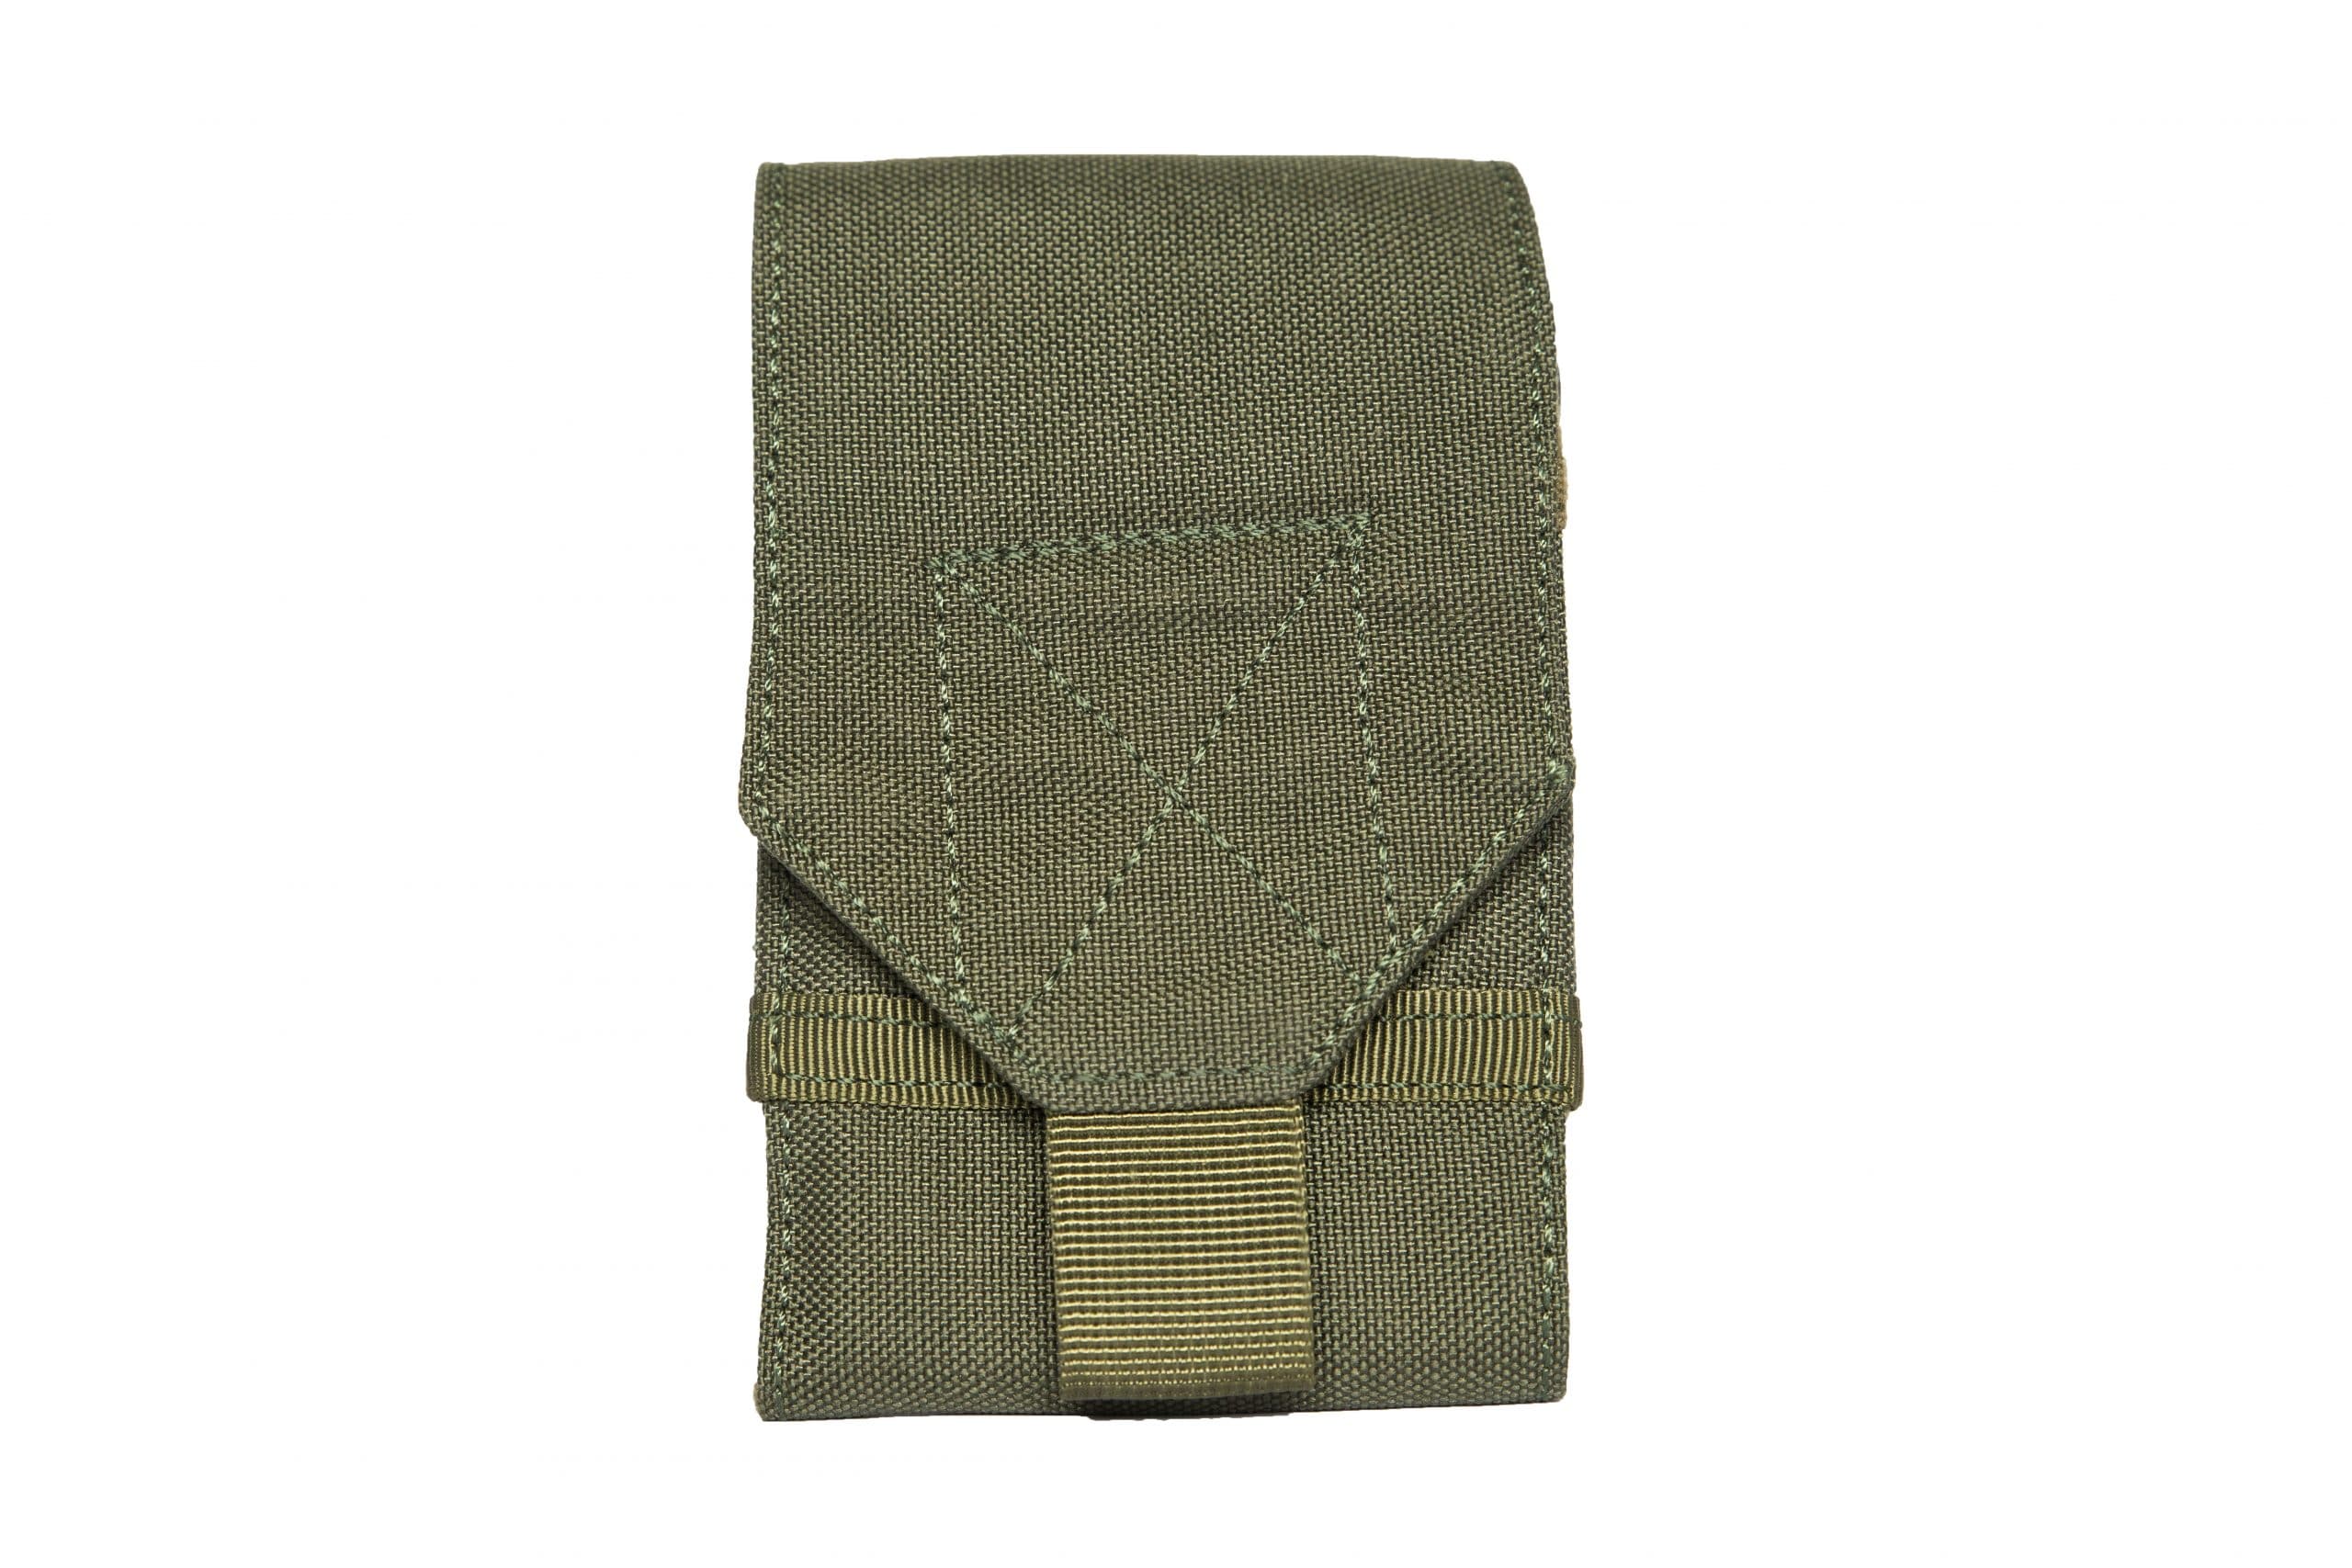 Fas145 soft pouch - Blades and Triggers Fas145 soft pouch